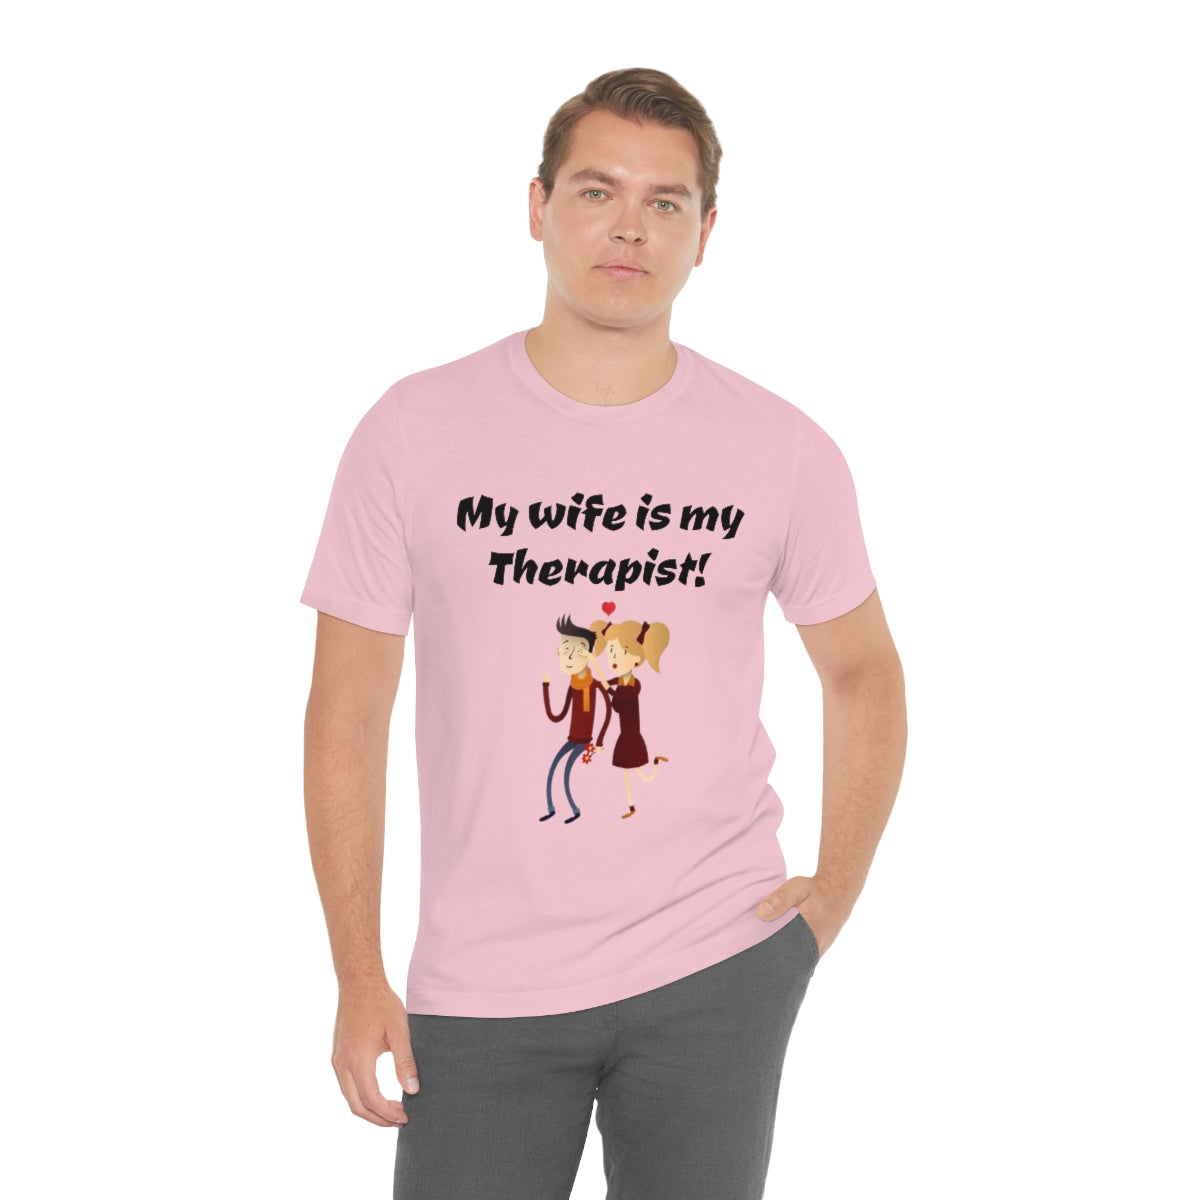 My wife is my Therapist- Funny Unisex Short Sleeve Tee